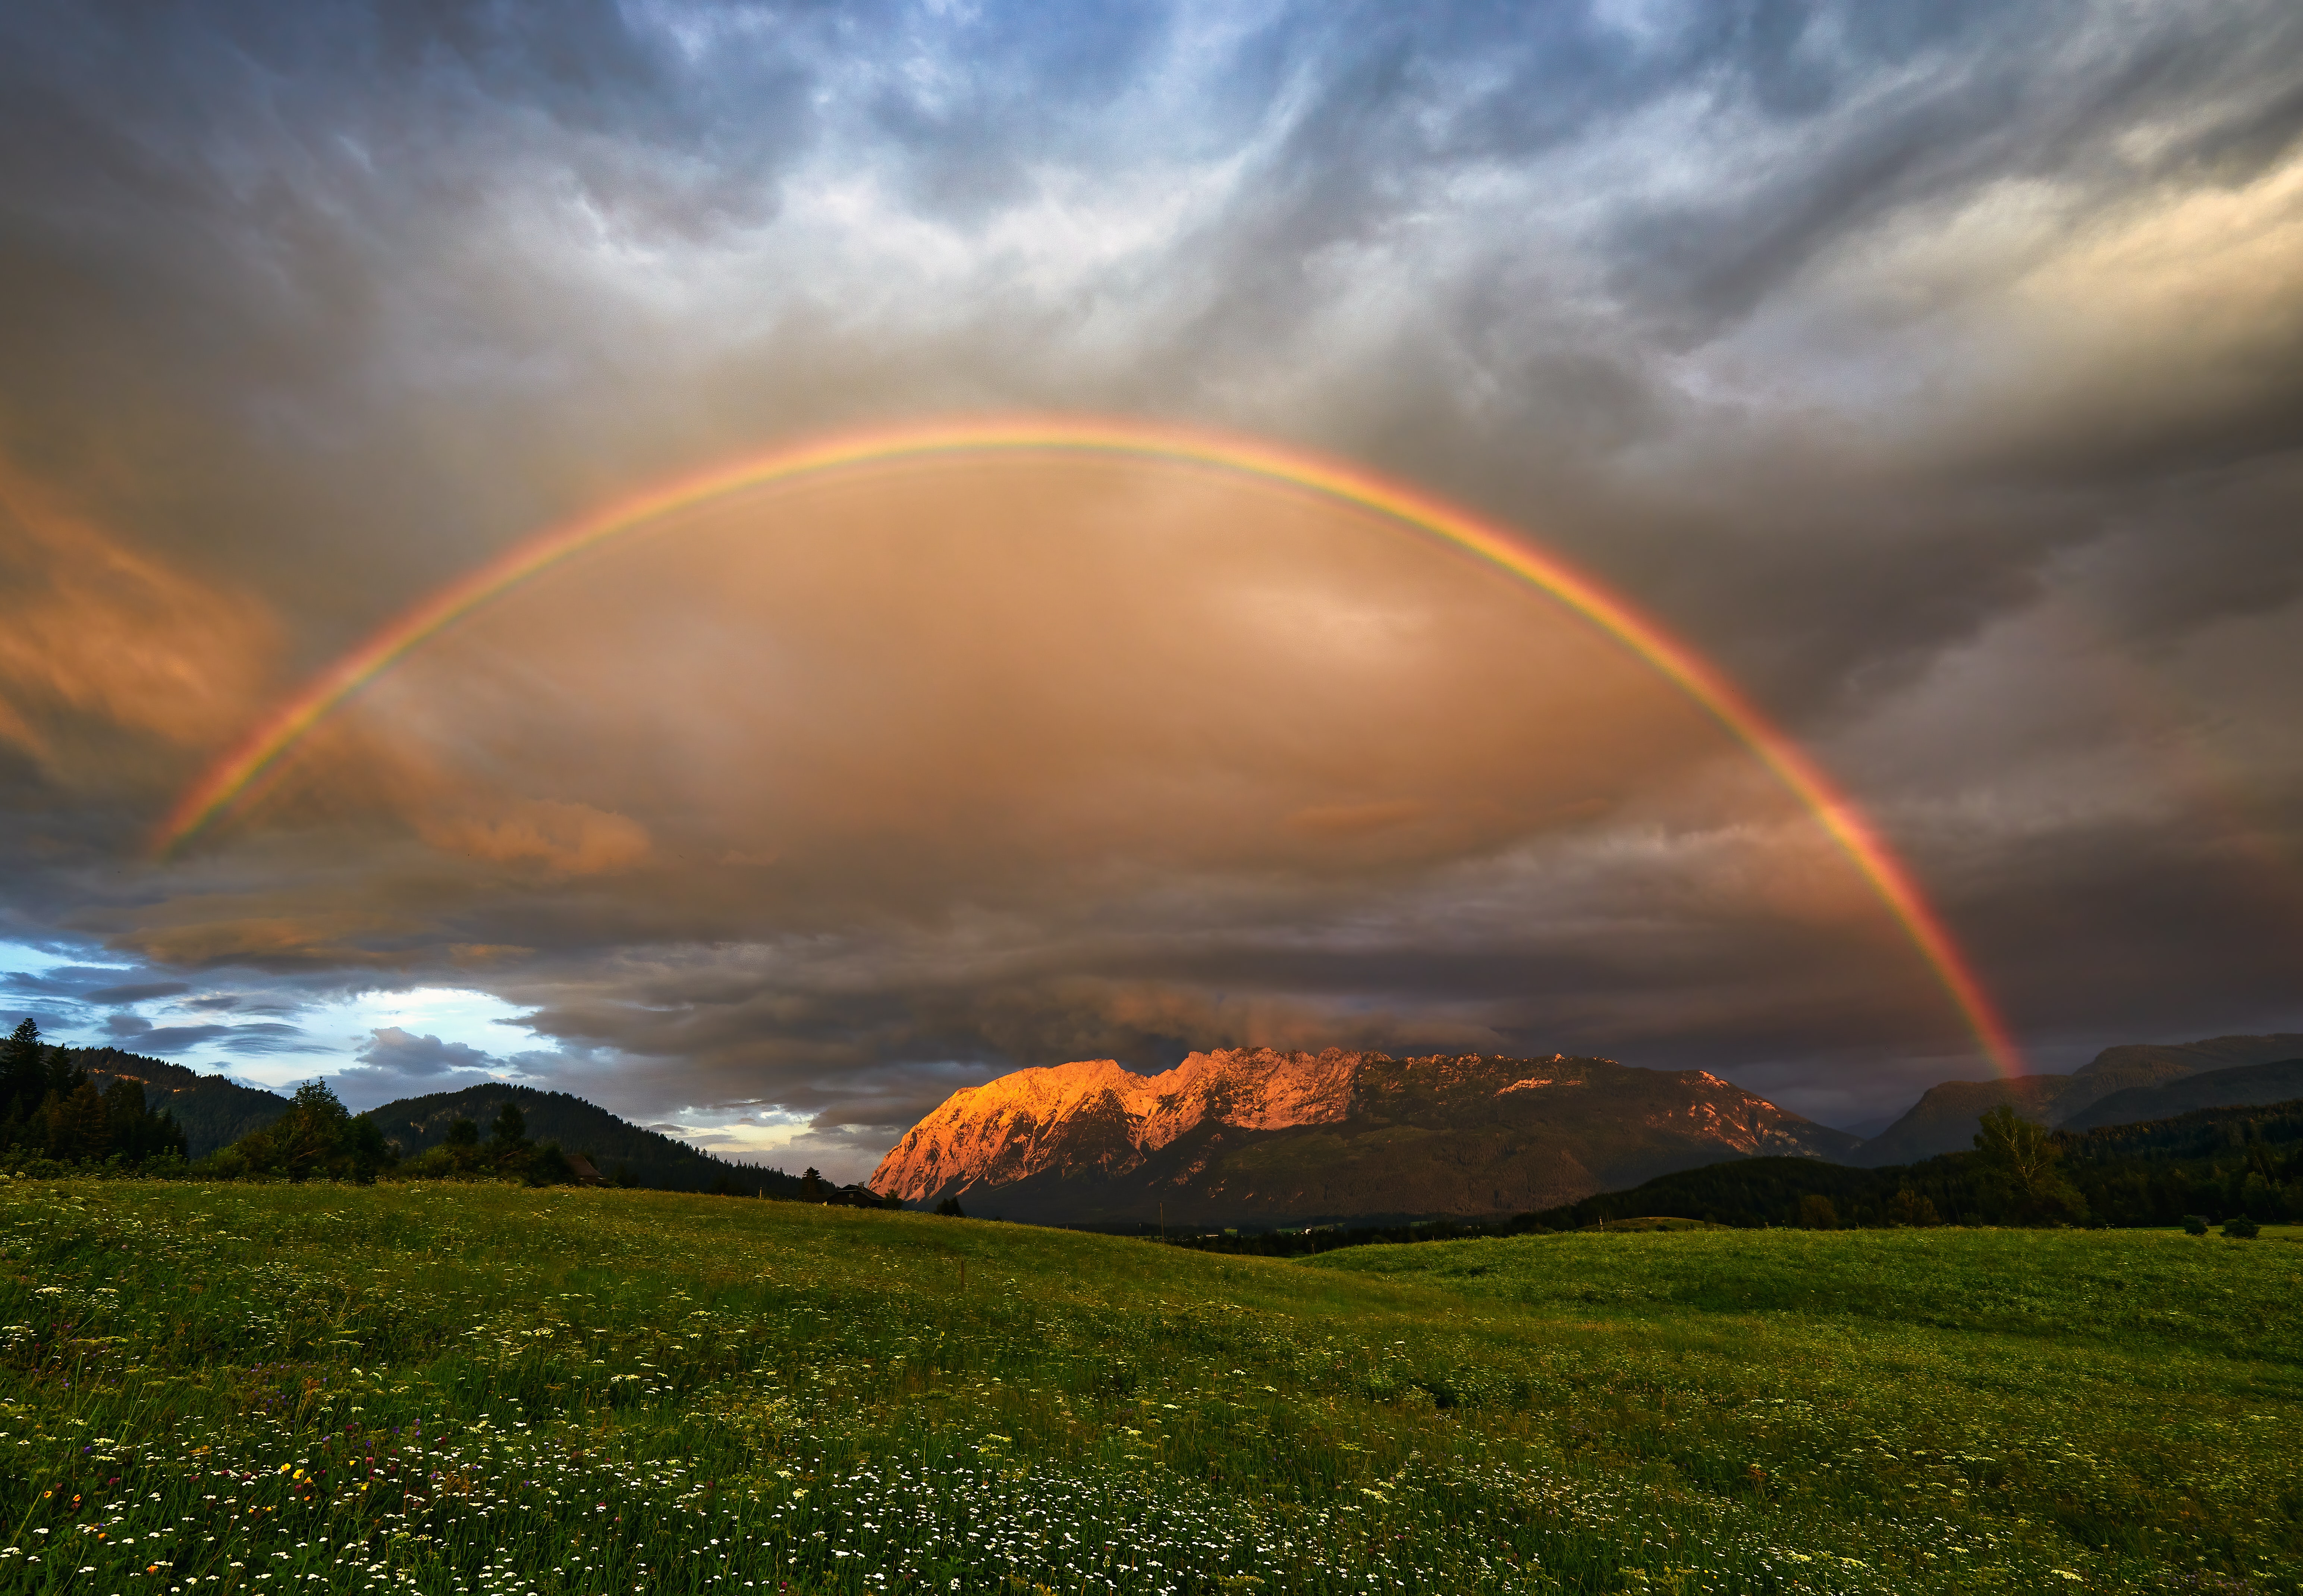 Wallpaper Full HD landscape, meadow, mountains, nature, rainbow